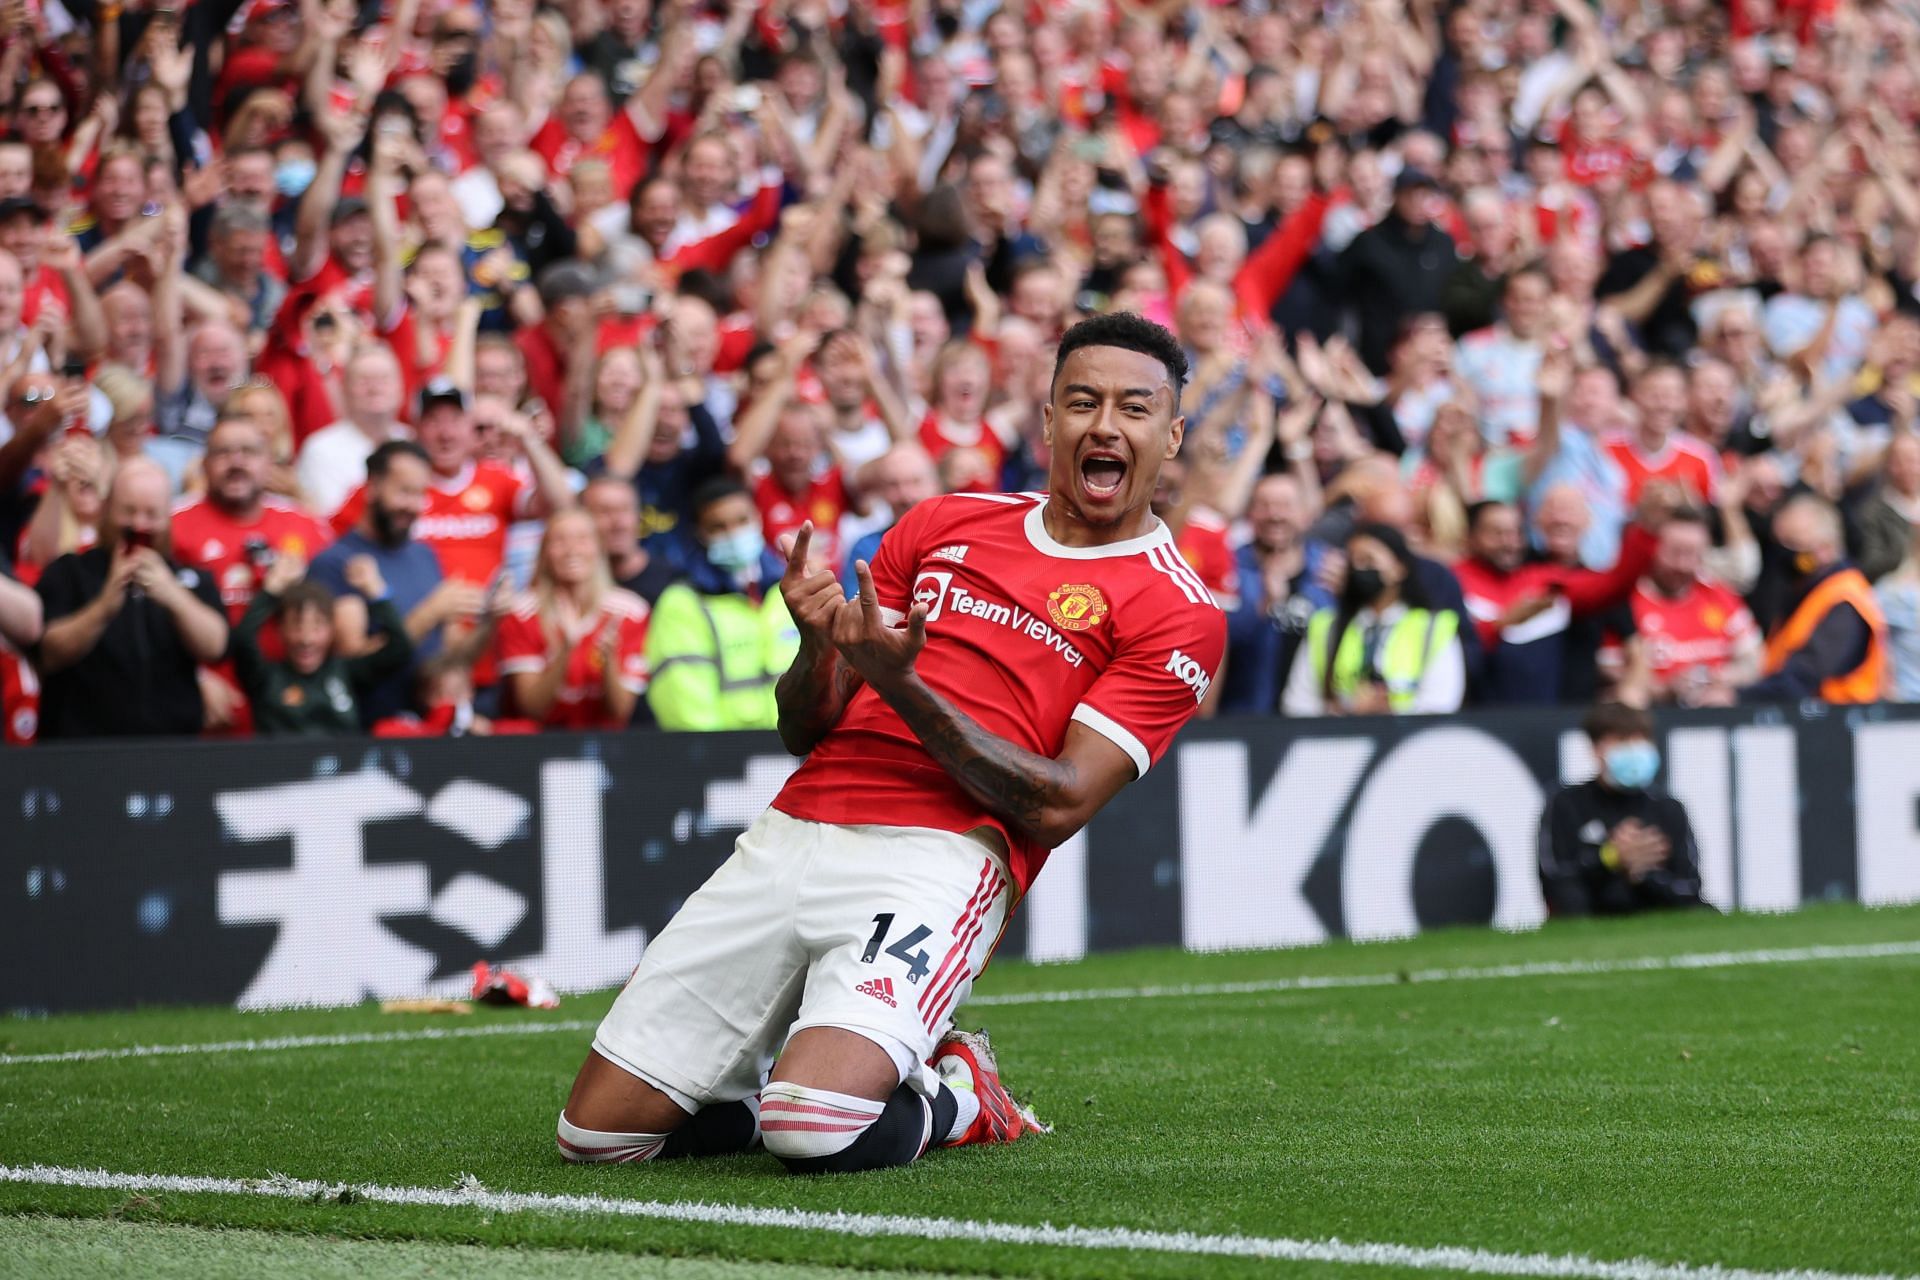 Jesse Lingard has been unfortunate to not get enough game time at Manchester United